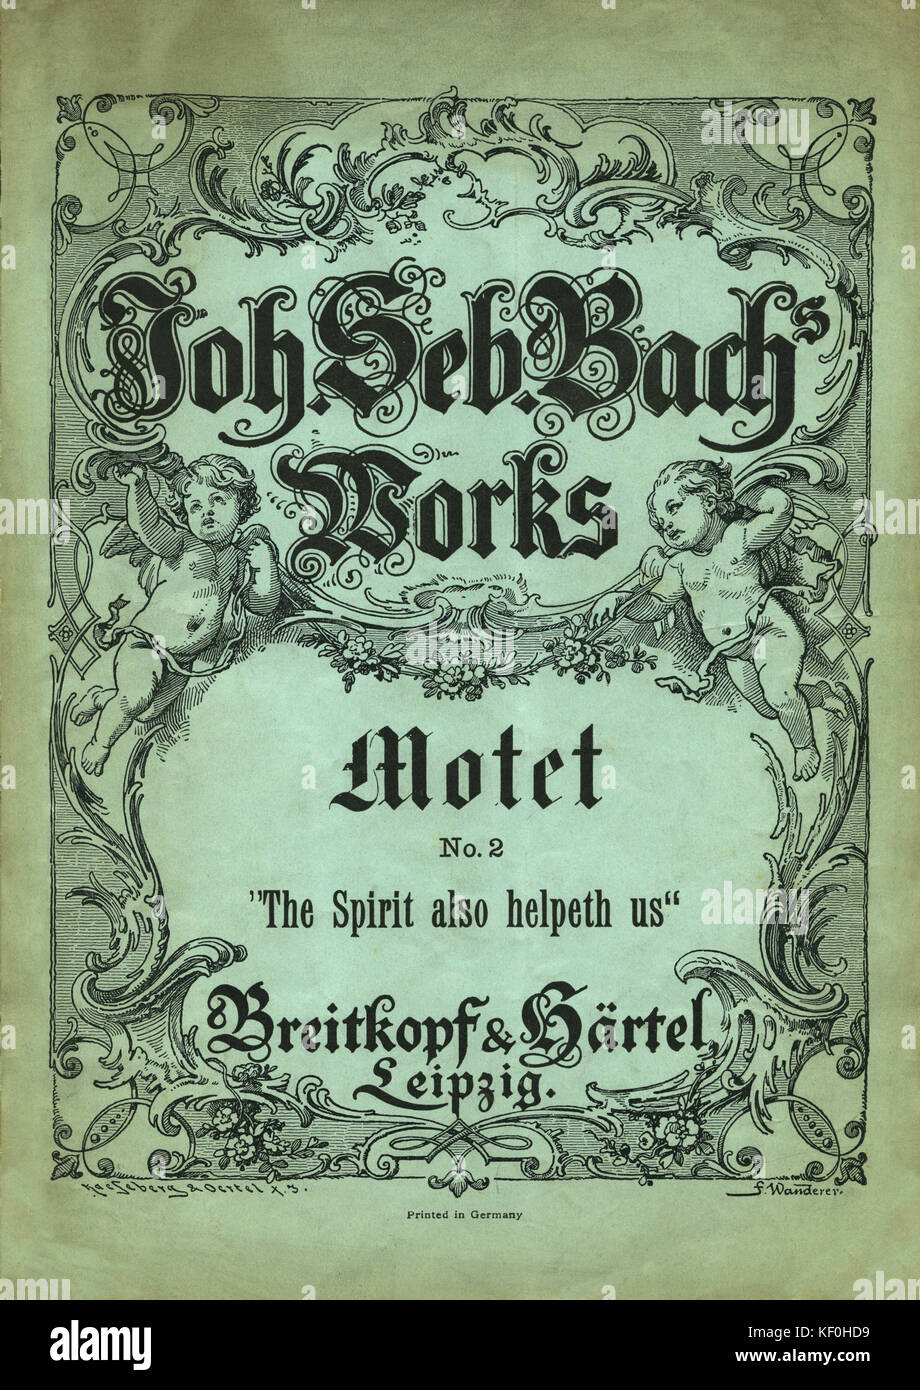 Johann Sebastian Bach 's 'Motet no. 2', cover 'The Spirit also helpeth us'. Published by Breitkopf & Hartel, Leipzig. German composer & organist, 21 March 1685 - 28 July 1750. Stock Photo